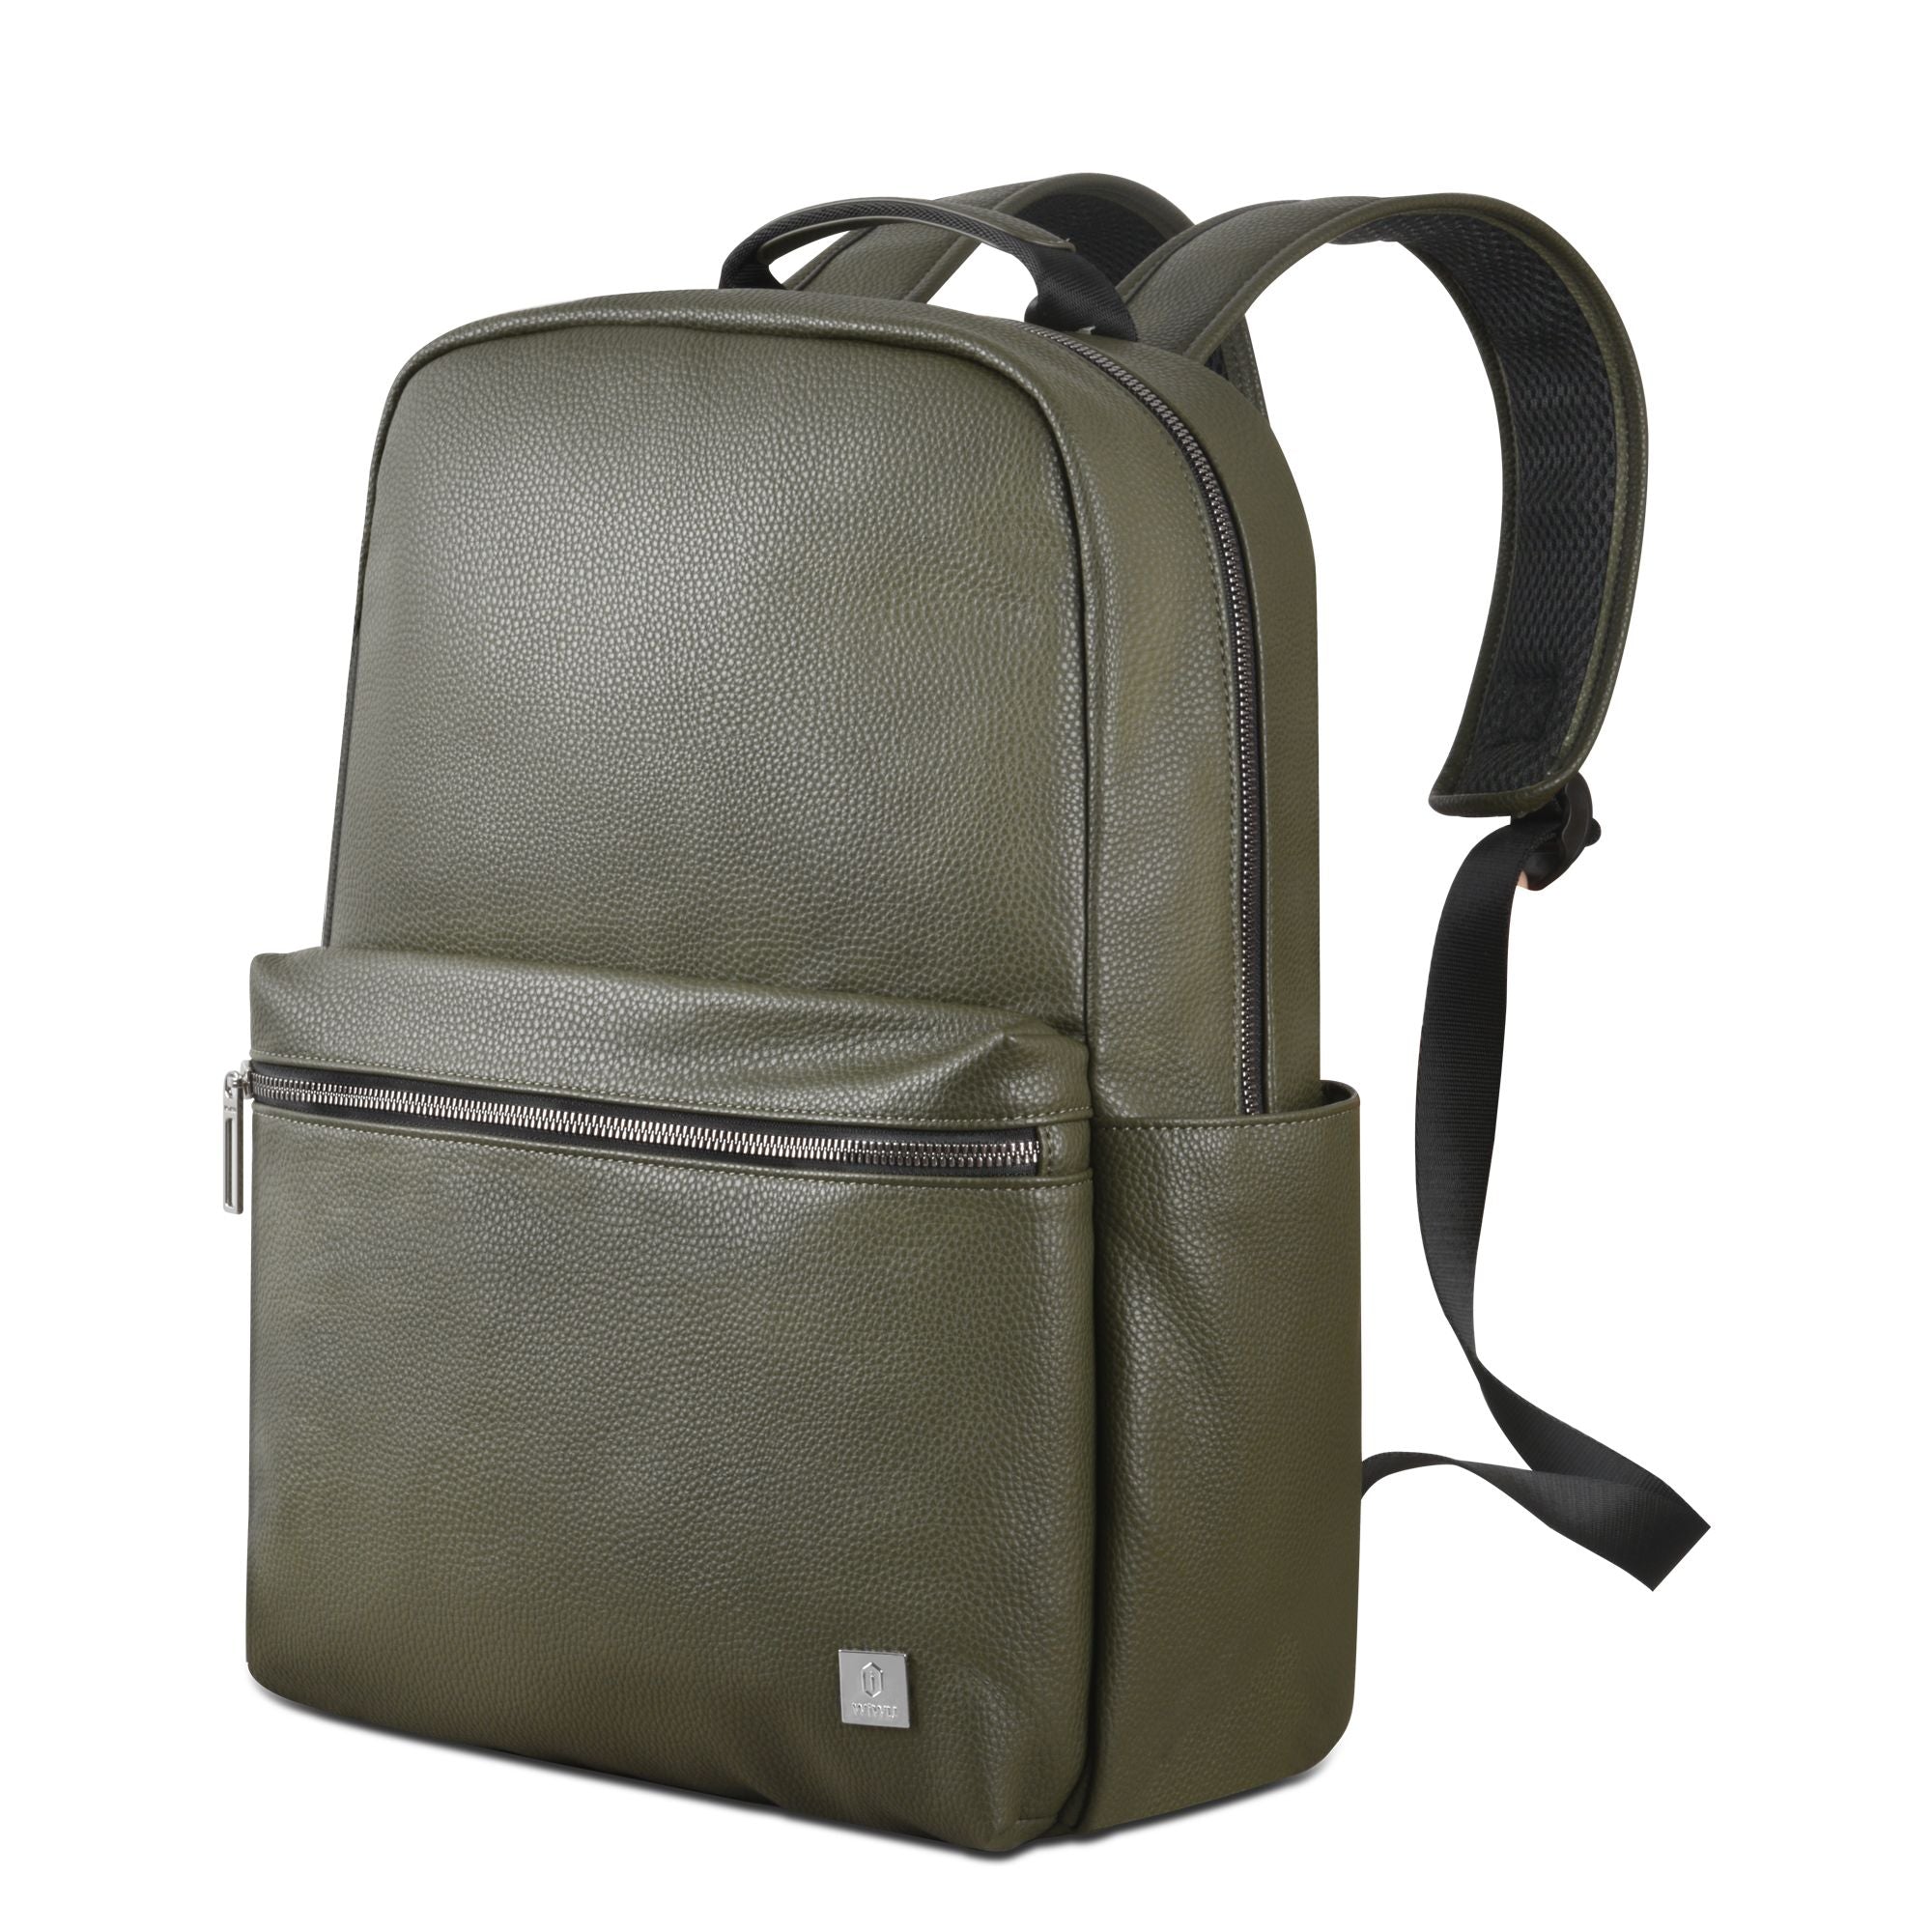 WIWU Osun Backpack PU leather with front pocket& Laptop